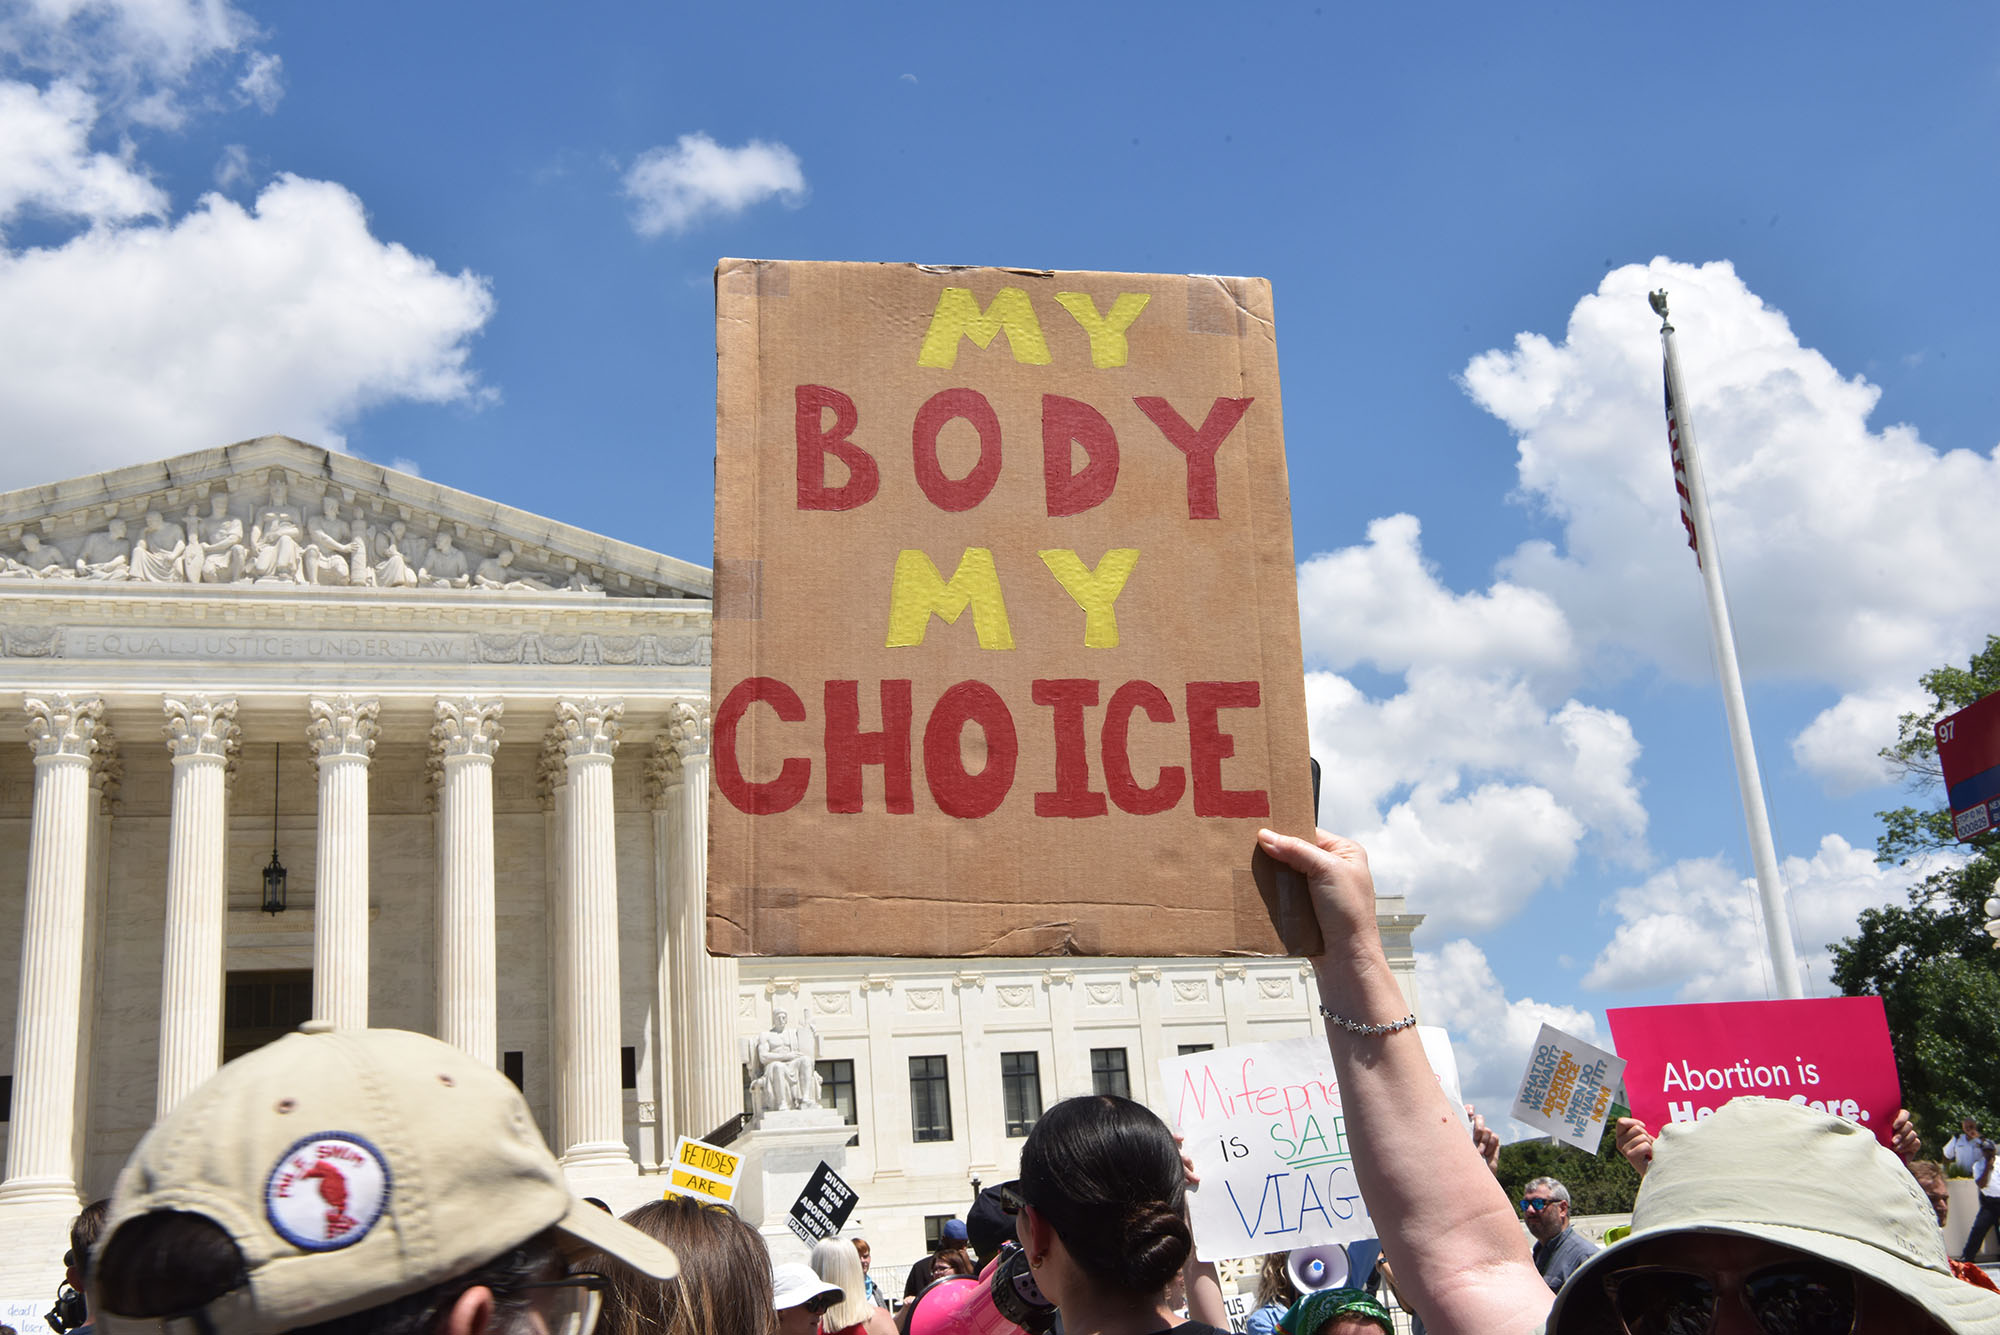 Photo: A picture of a person holding up a sign that says "My Body My Choice" outside of the United States Supreme Court Building